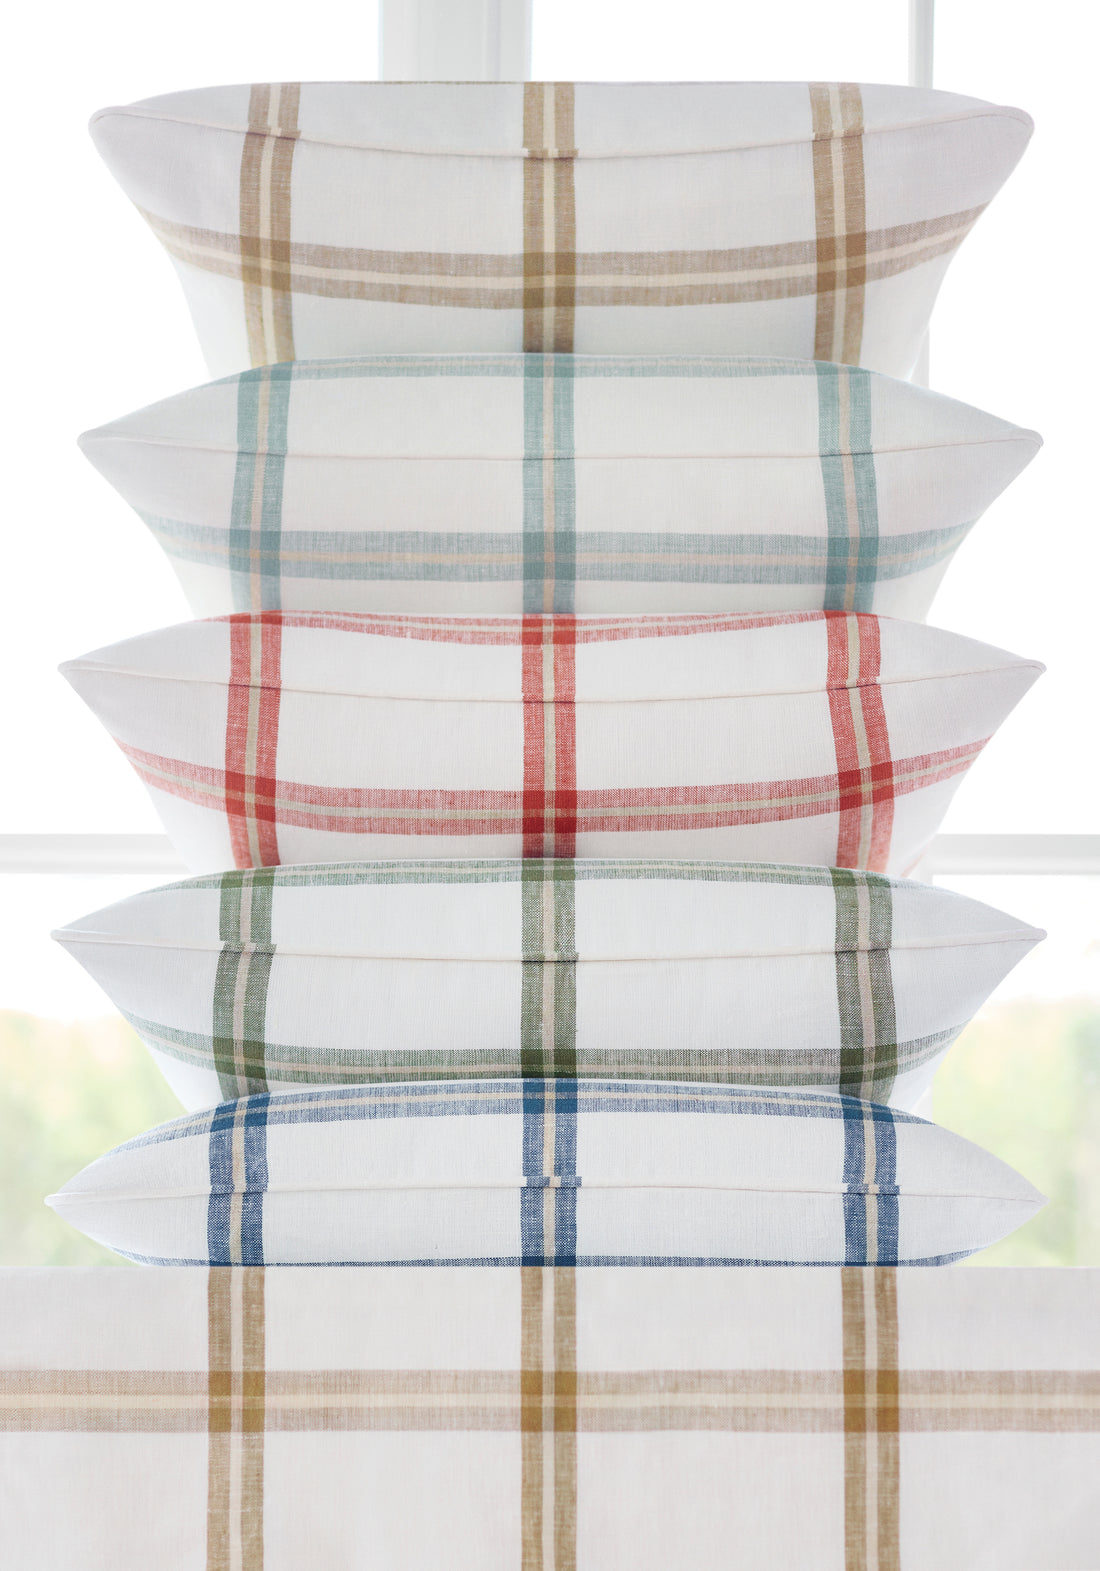 Pillows featuring Huntington Plaid fabric in sunbaked color - pattern number W781334 - by Thibaut in the Montecito collection